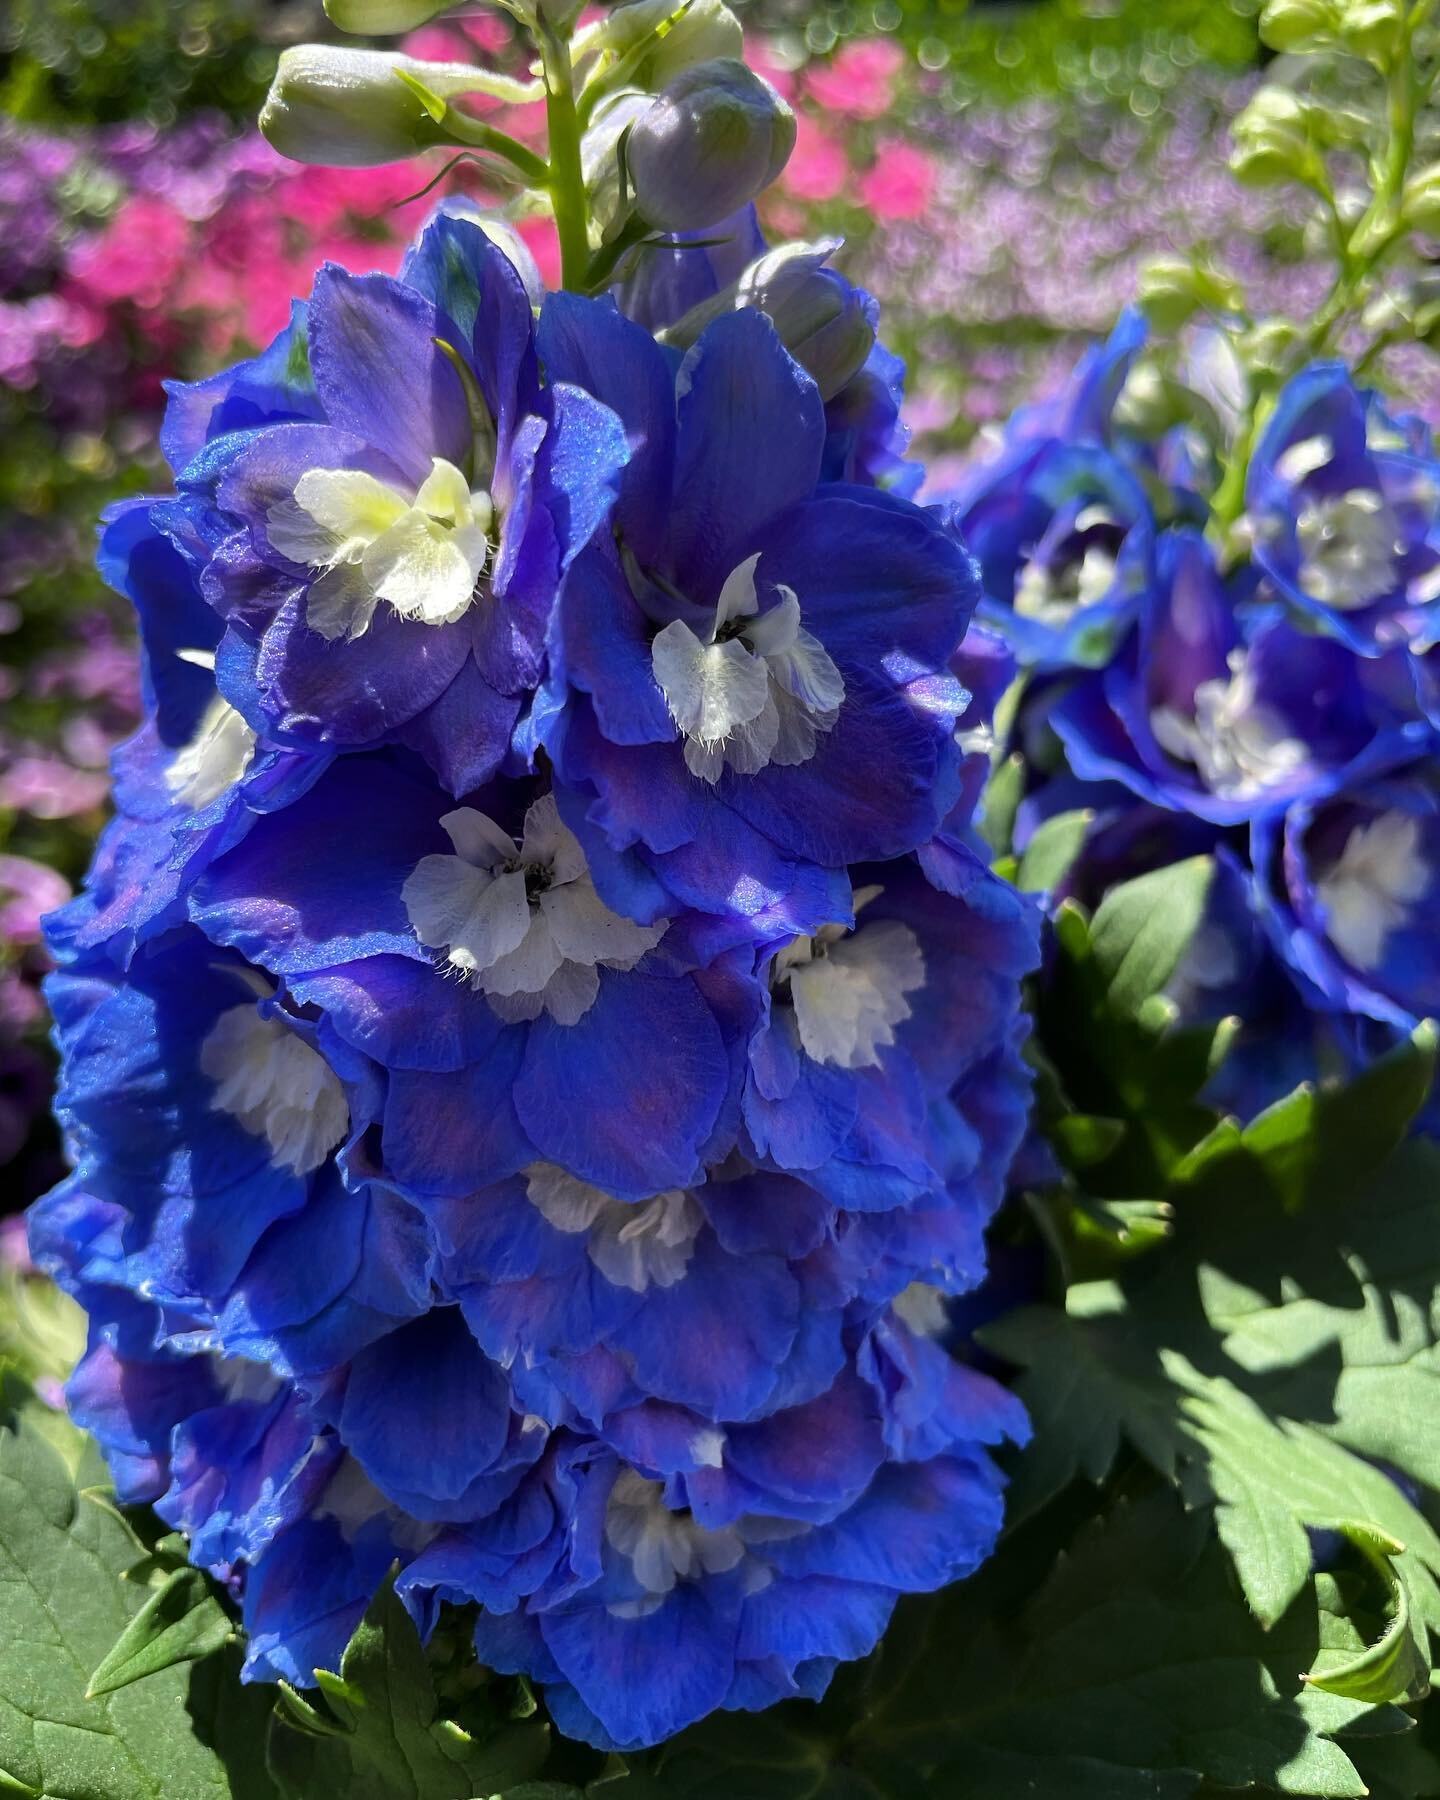 💐🌺🌸🌼🌻🌷🌹🪷

In the language of flowers, the Delphinium carries the symbolic meaning of joy, happiness, and goodwill. A delphinium flower also represents positive communication and interactions and has been utilized as a symbol to ward off evil 